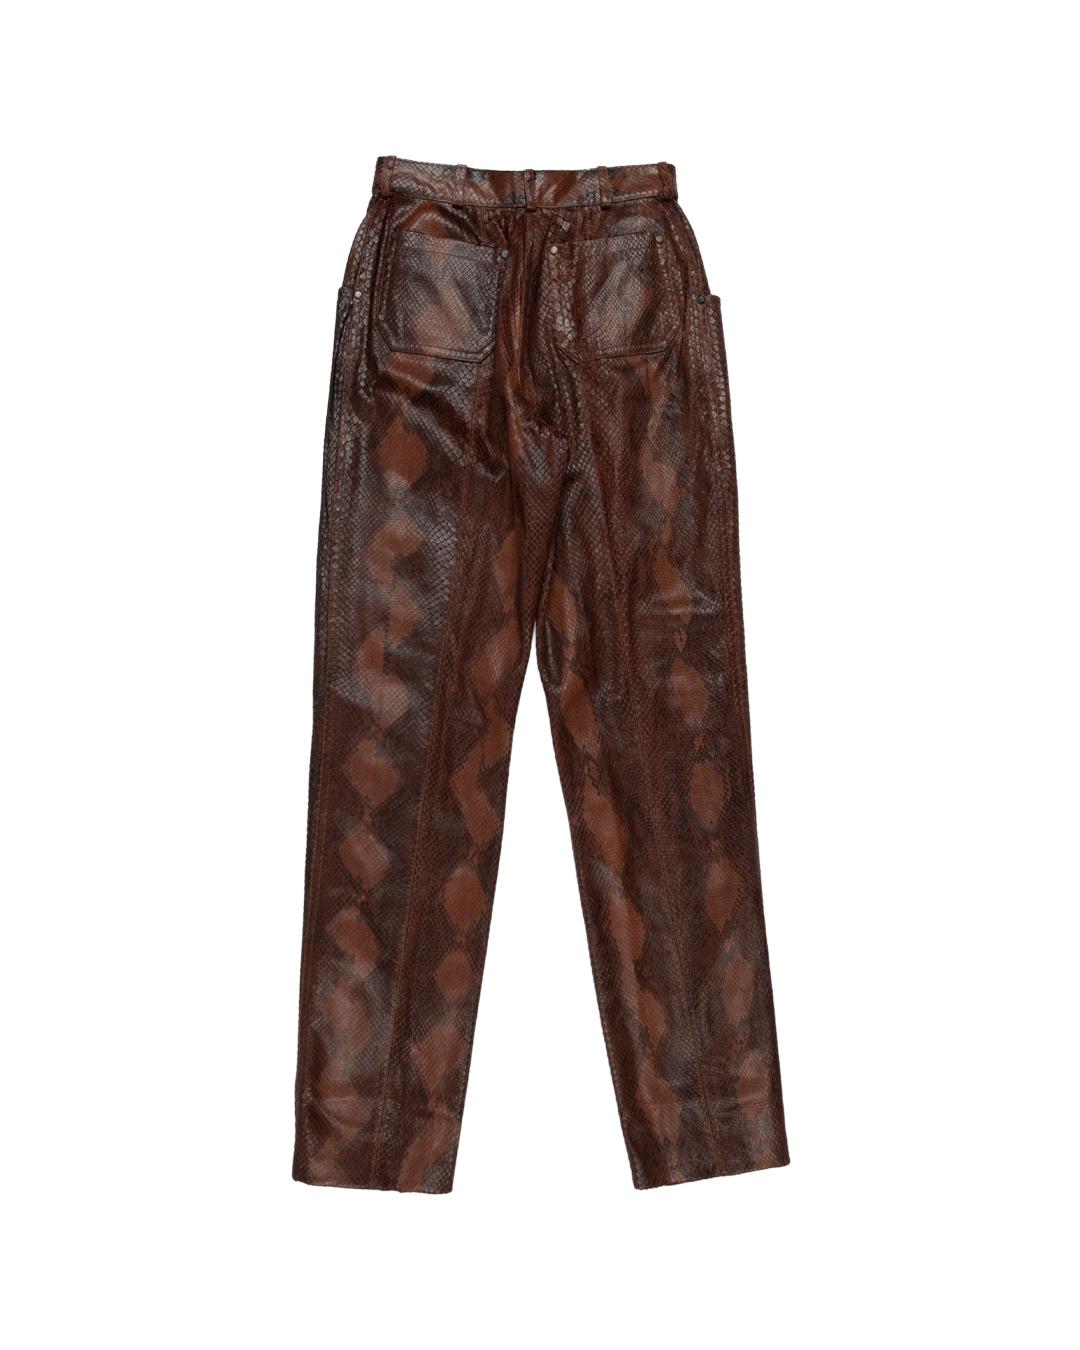 Women's Hermes Sample Python Leather Trousers For Sale